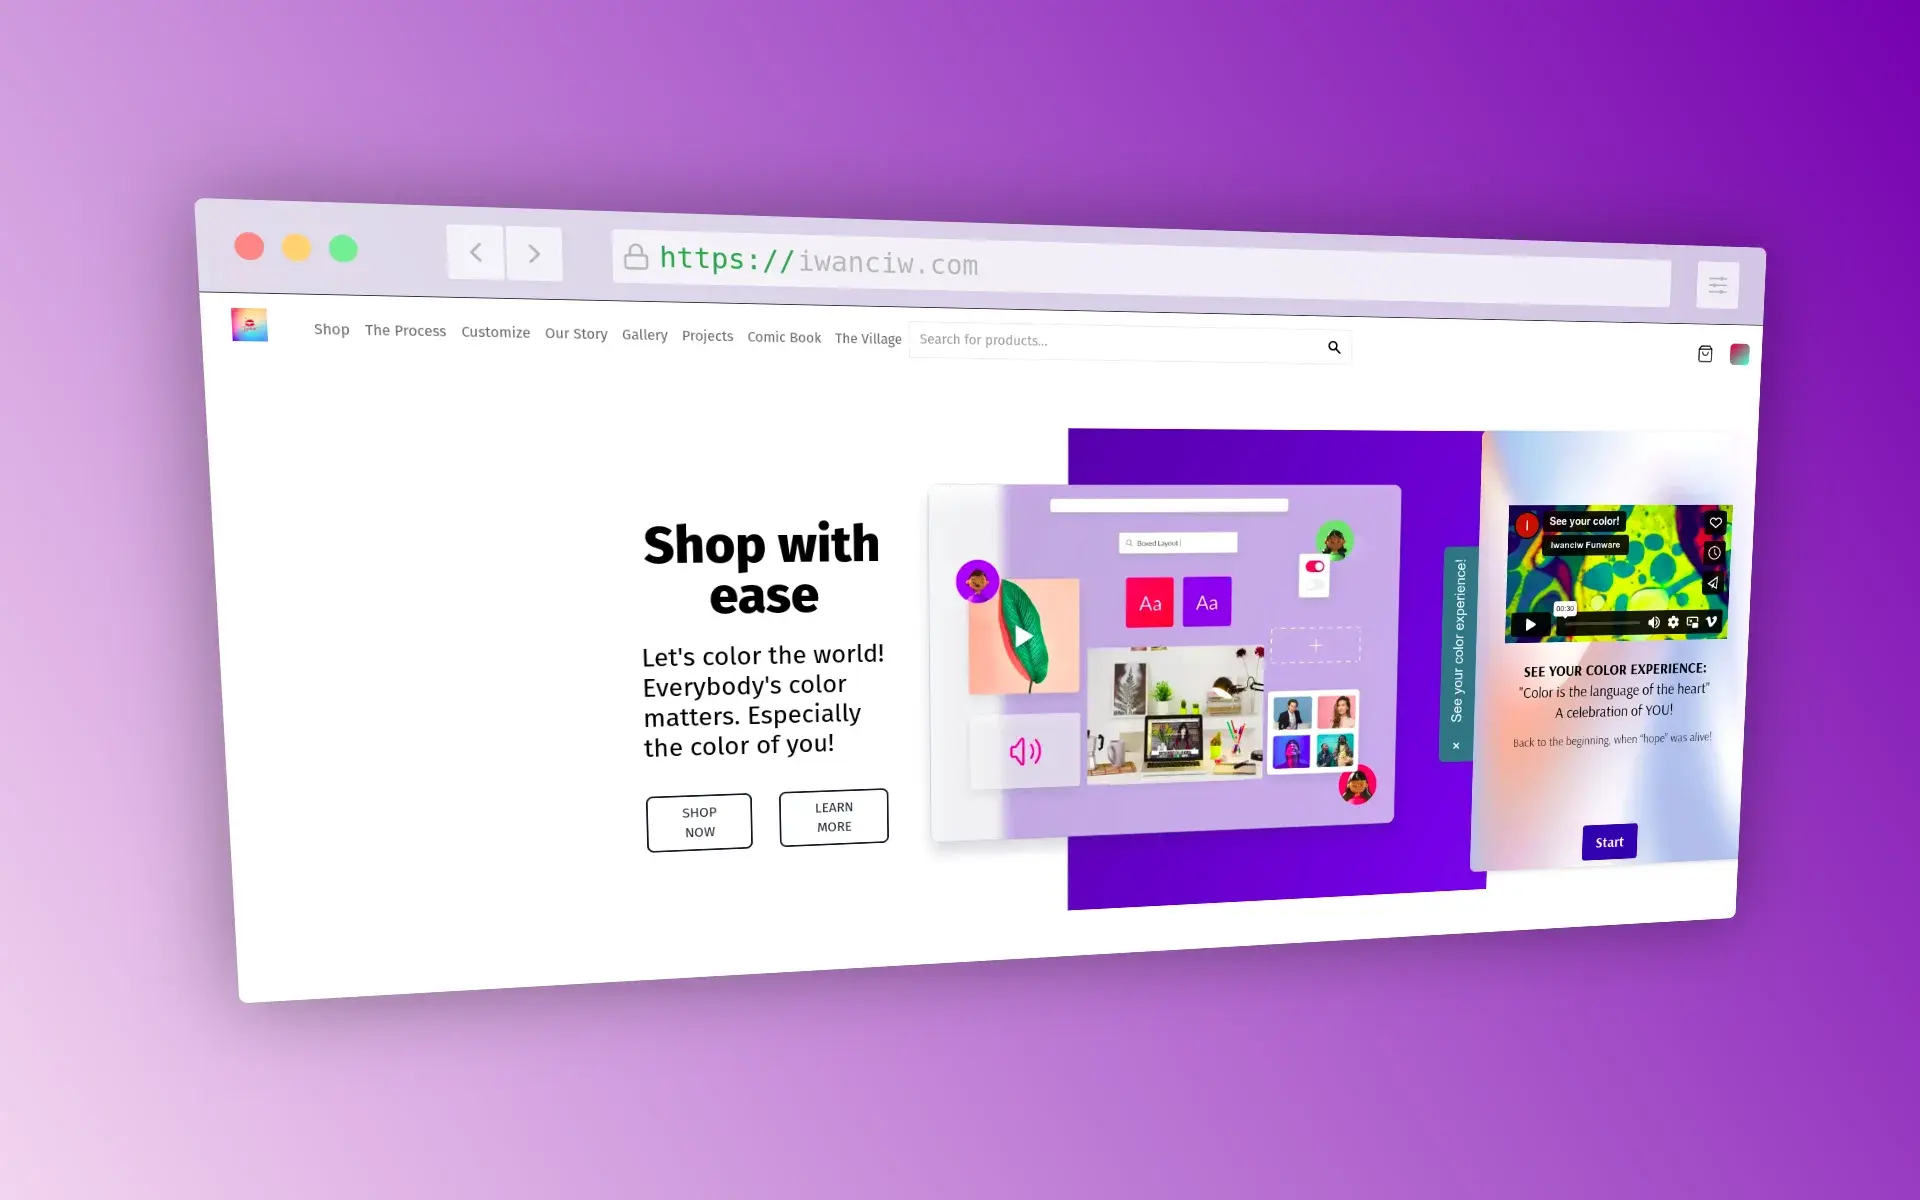 Screenshot of a colorful e-commerce website homepage featuring sections titled 'Shop with ease' and 'See your color experience'. The page showcases various color customization options, a video preview, and call-to-action buttons.